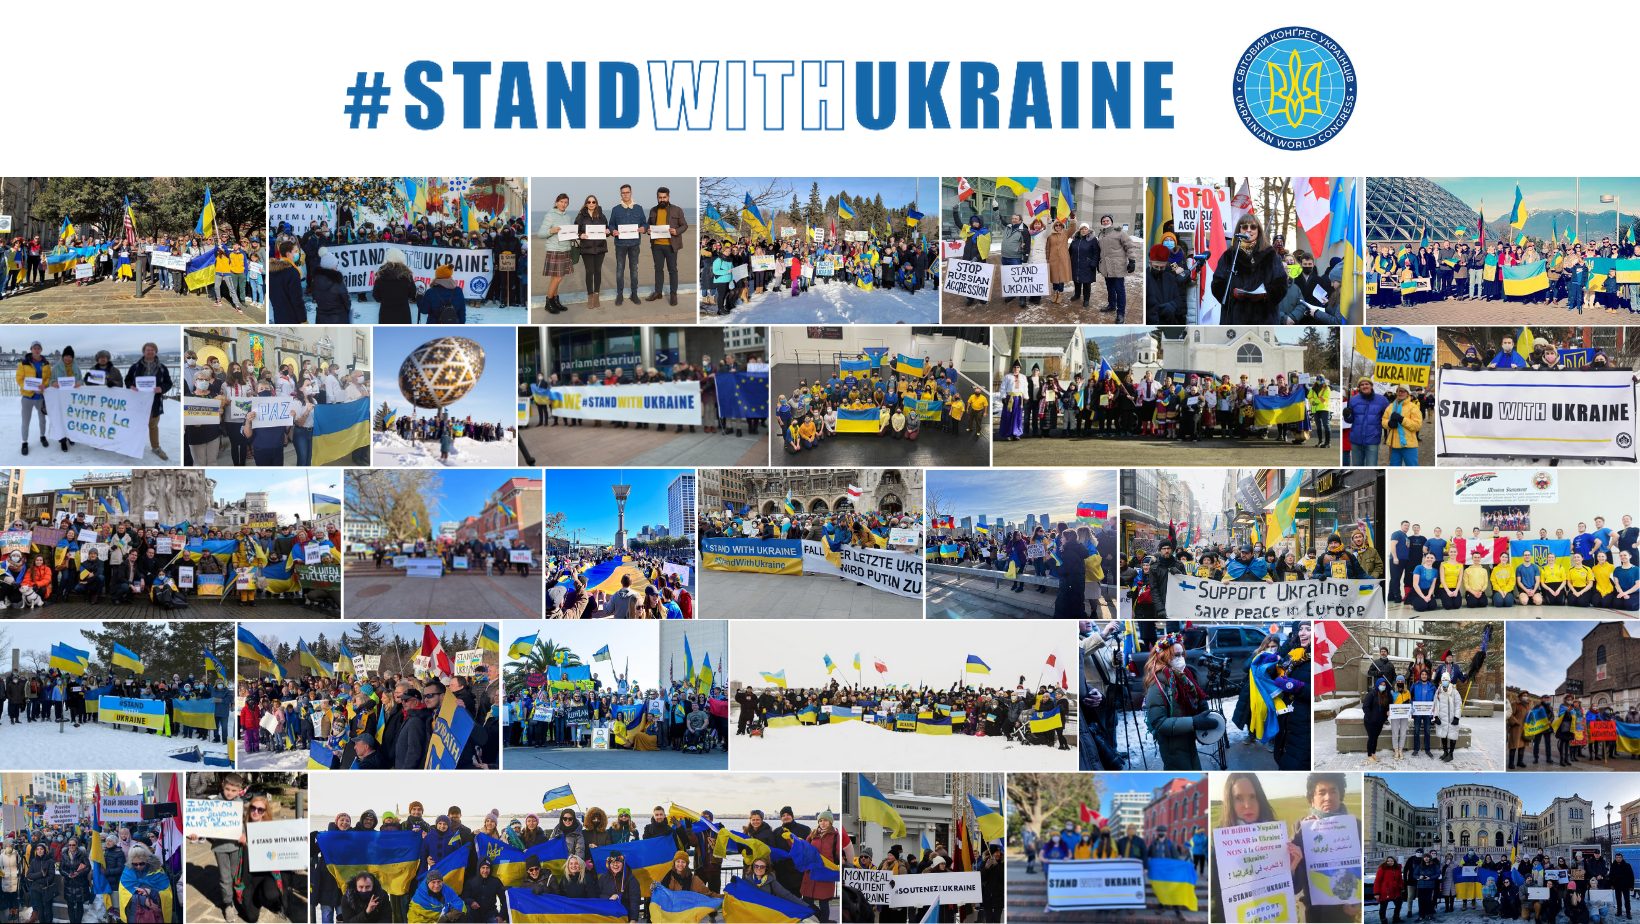 February 10, 2022 – The Ukrainian World Congress and 20-million strong Ukrainian global communities stand united in support of Ukraine’s sovereignty and territorial integrity.